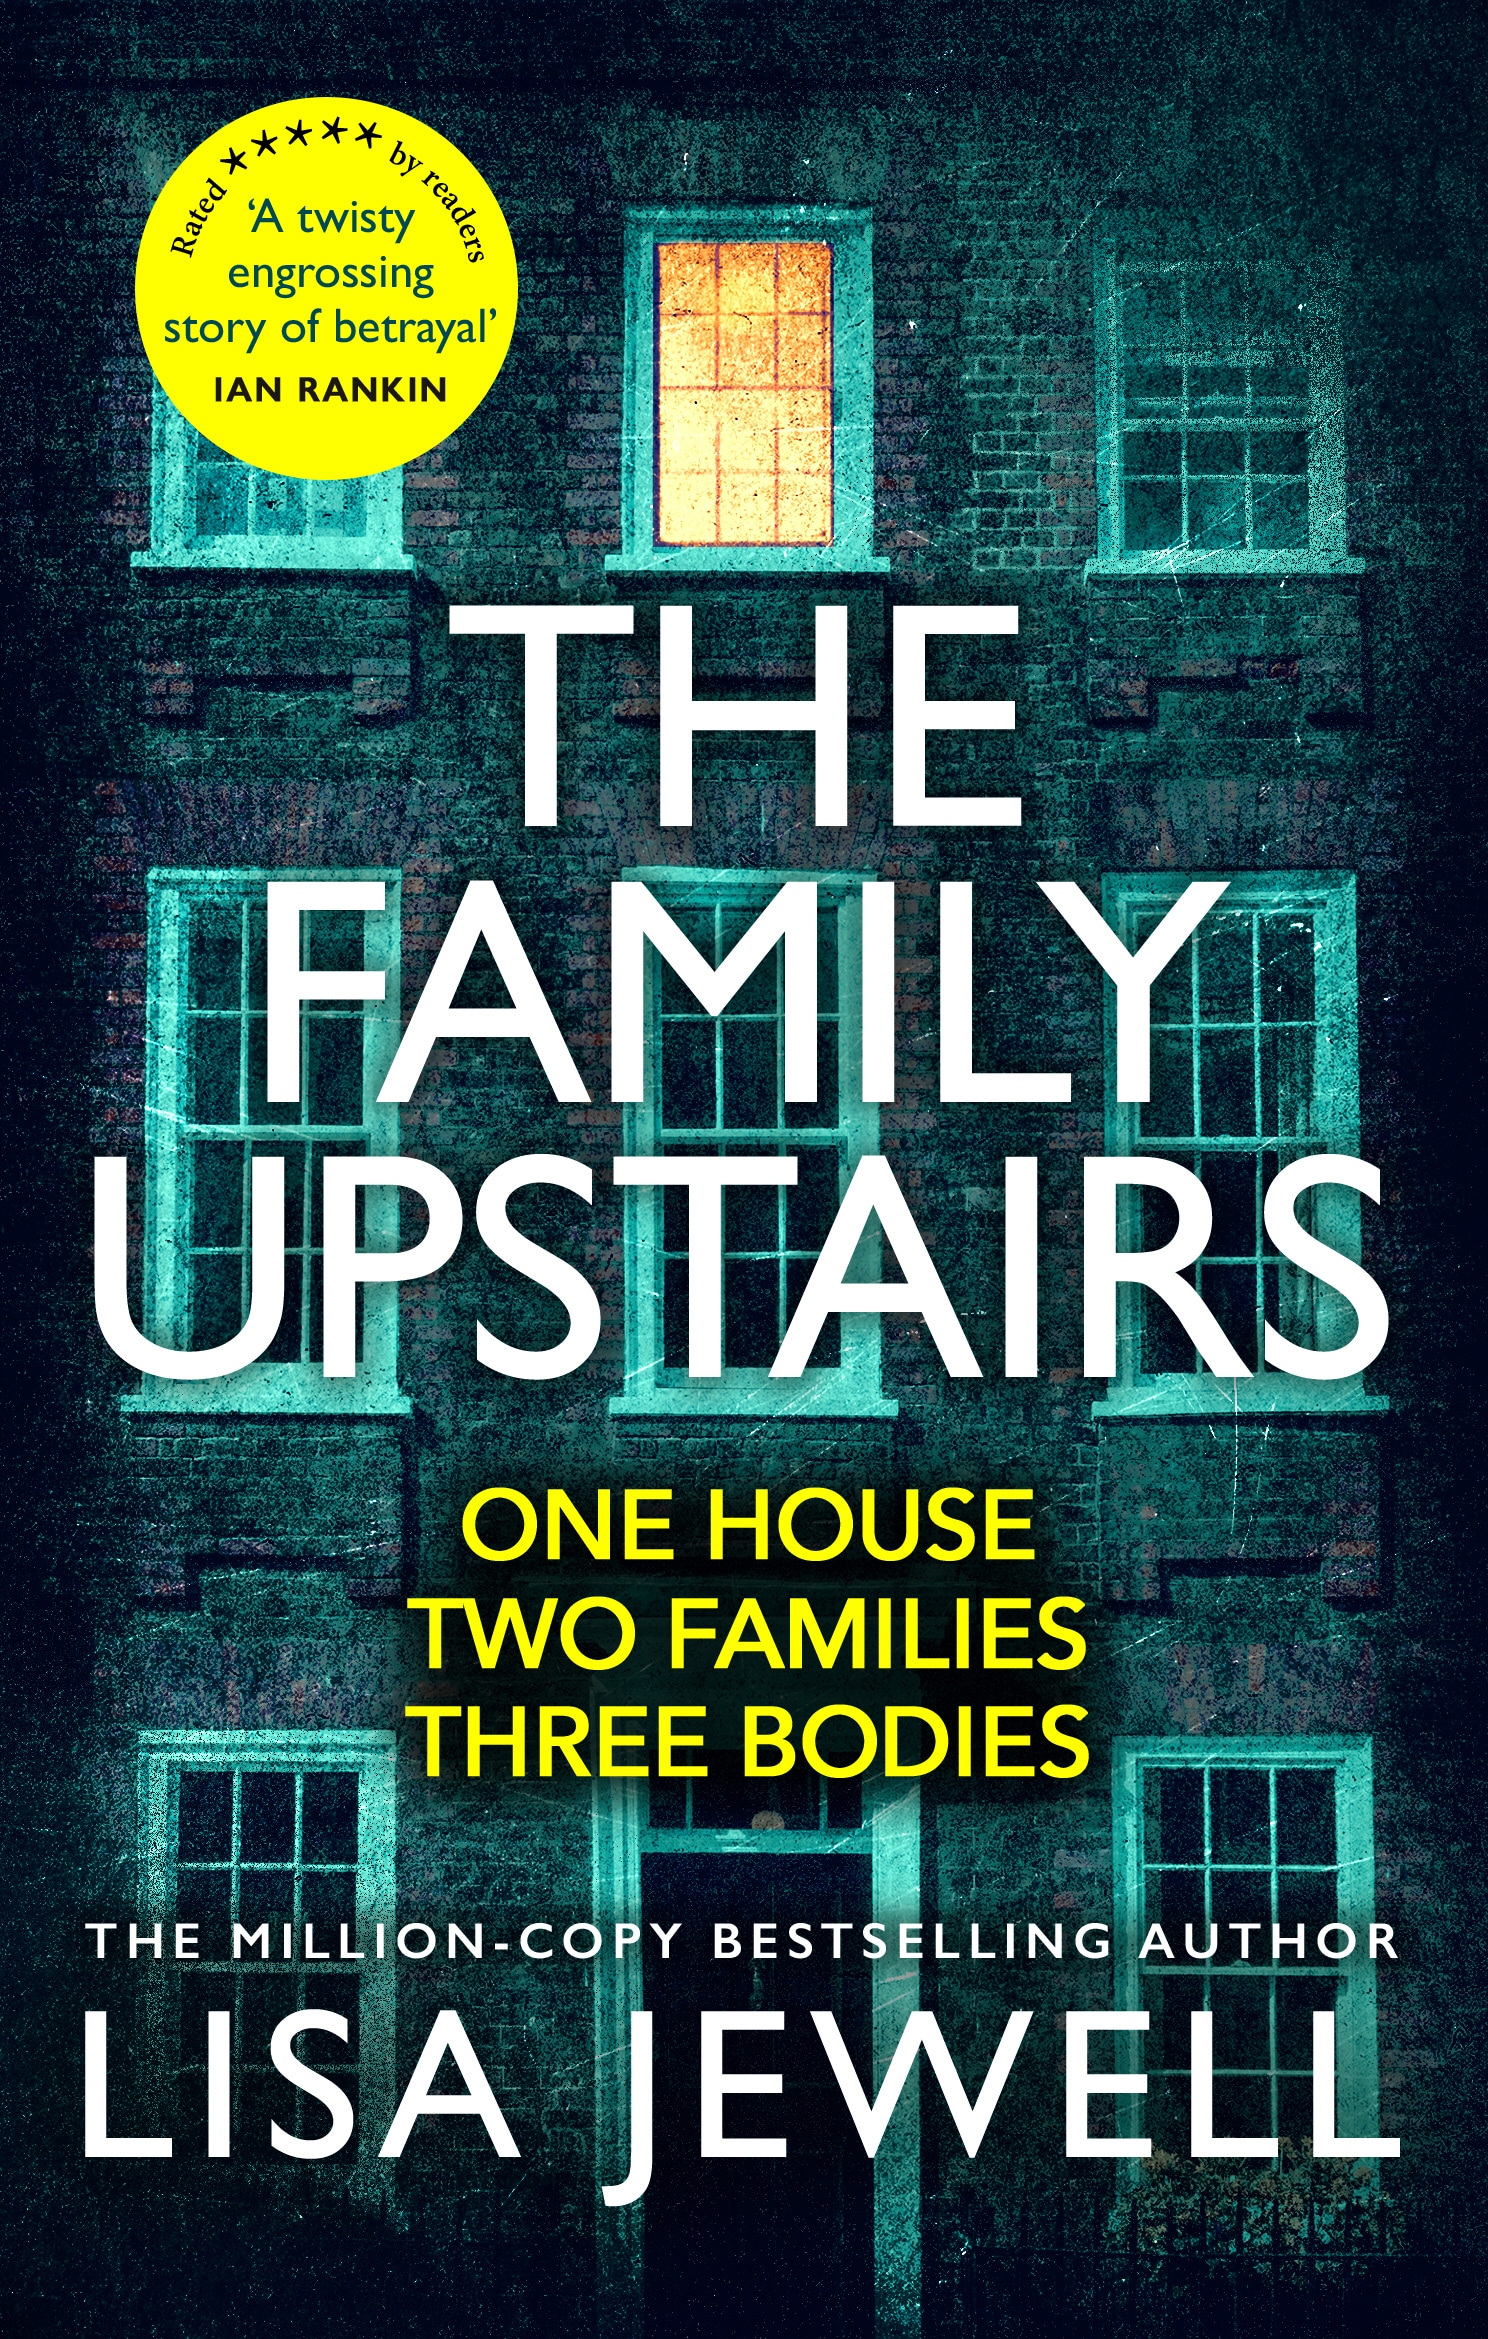 Book “The Family Upstairs” by Lisa Jewell — December 12, 2019